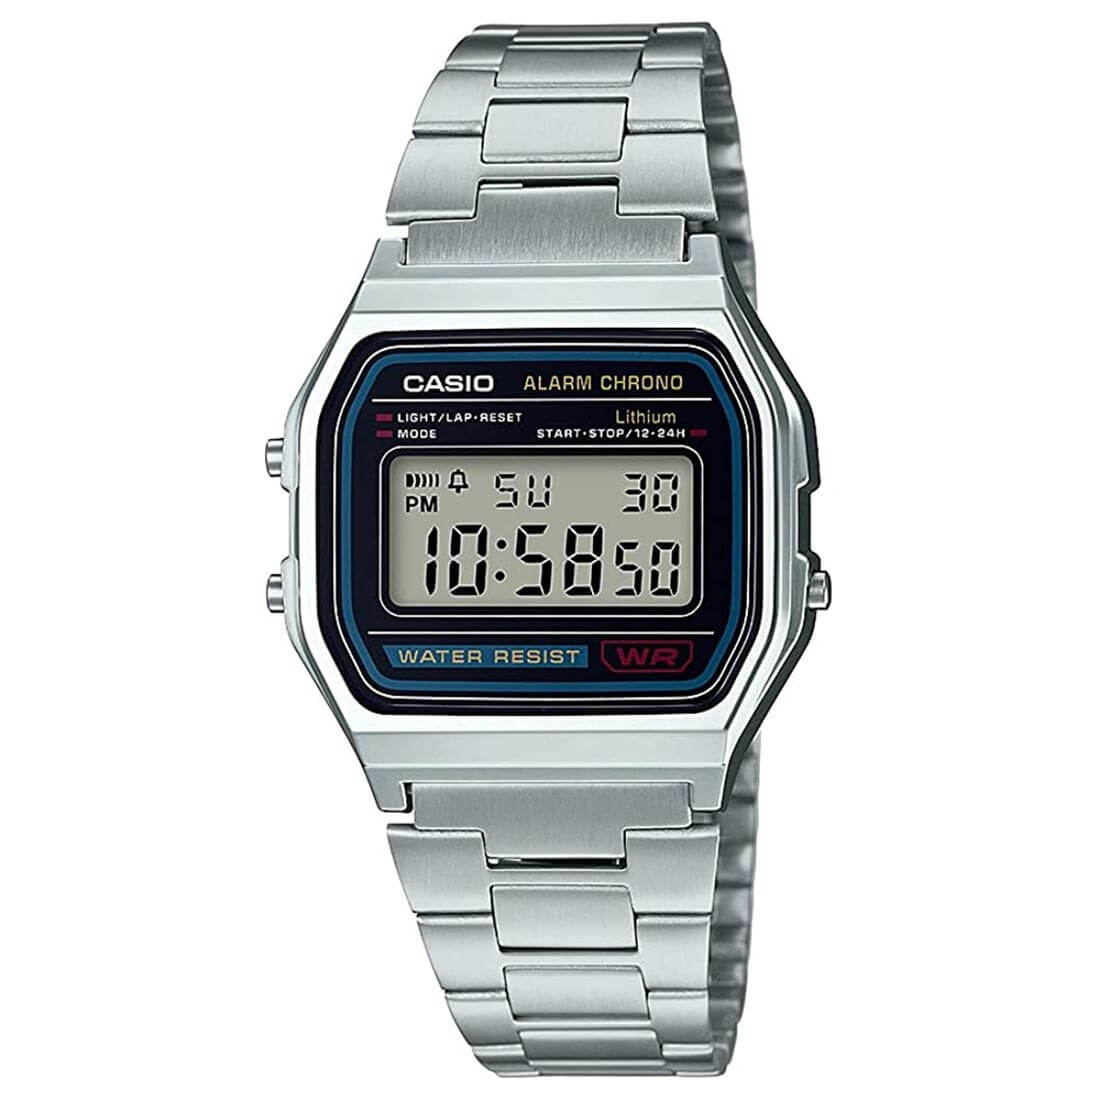 Casio Digitial Watch with Stainless Band - $14.00 + Free Shipping with Codes